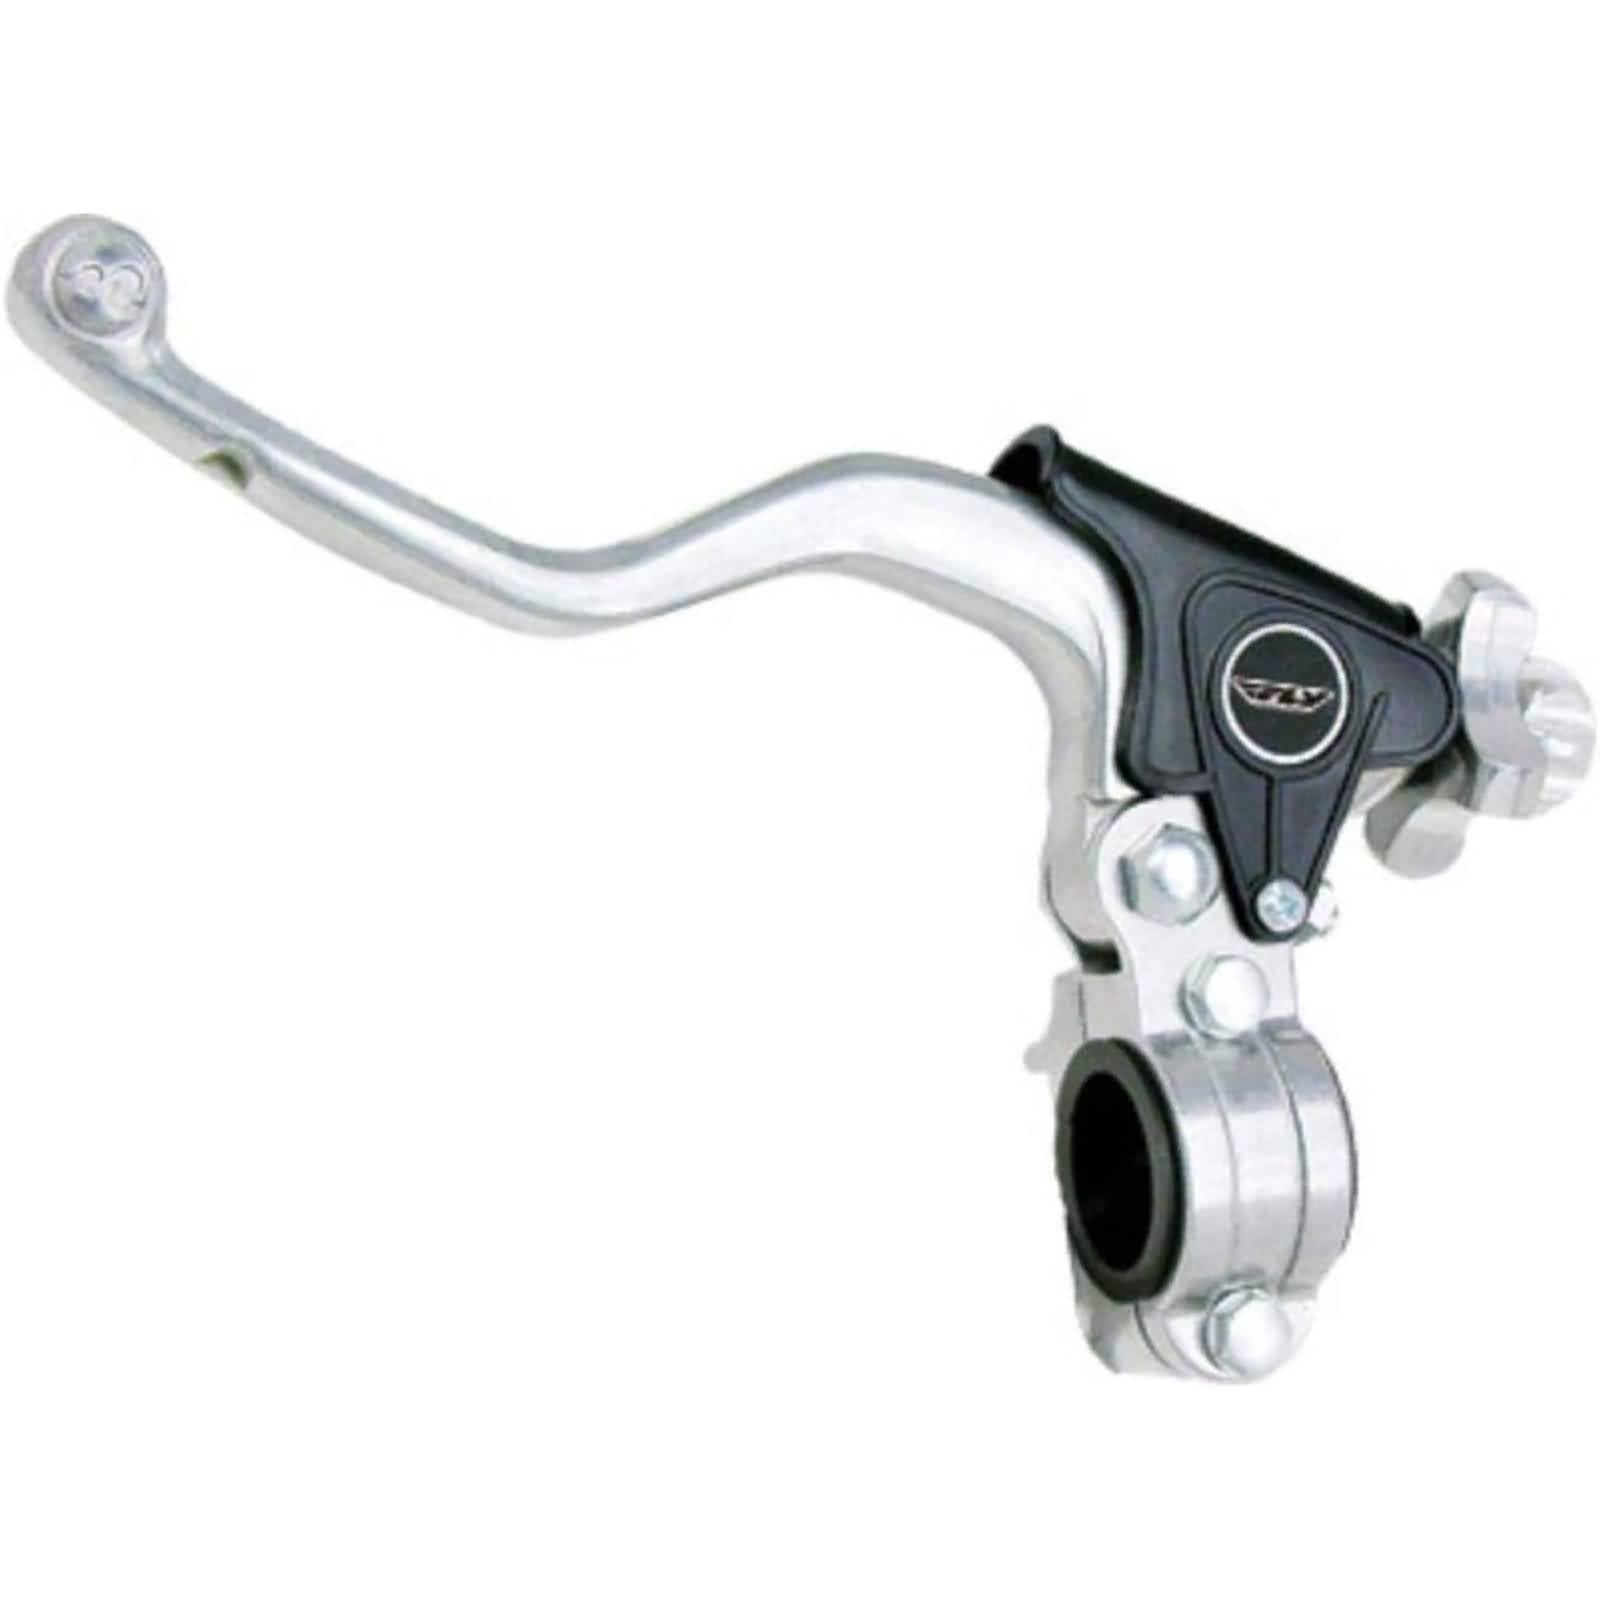 Fly Racing Pro Shorty Honda CR125R 1984-2007 Brake Lever Accessories-567